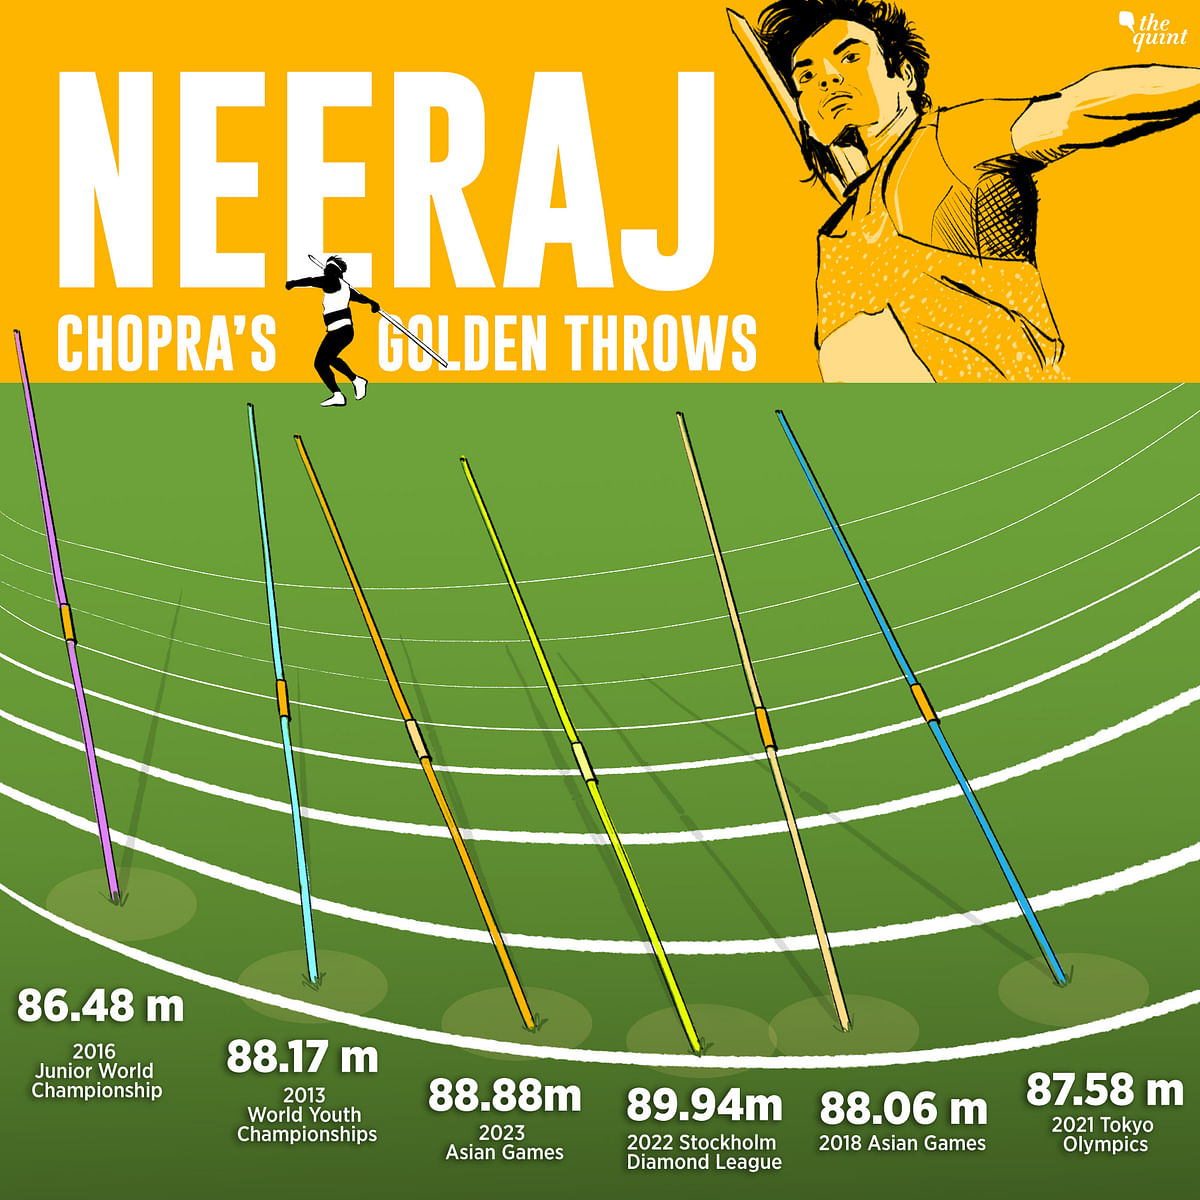 Confusion surrounded the start of the javelin final with the officials unable to measure Neeraj Chopra's first throw